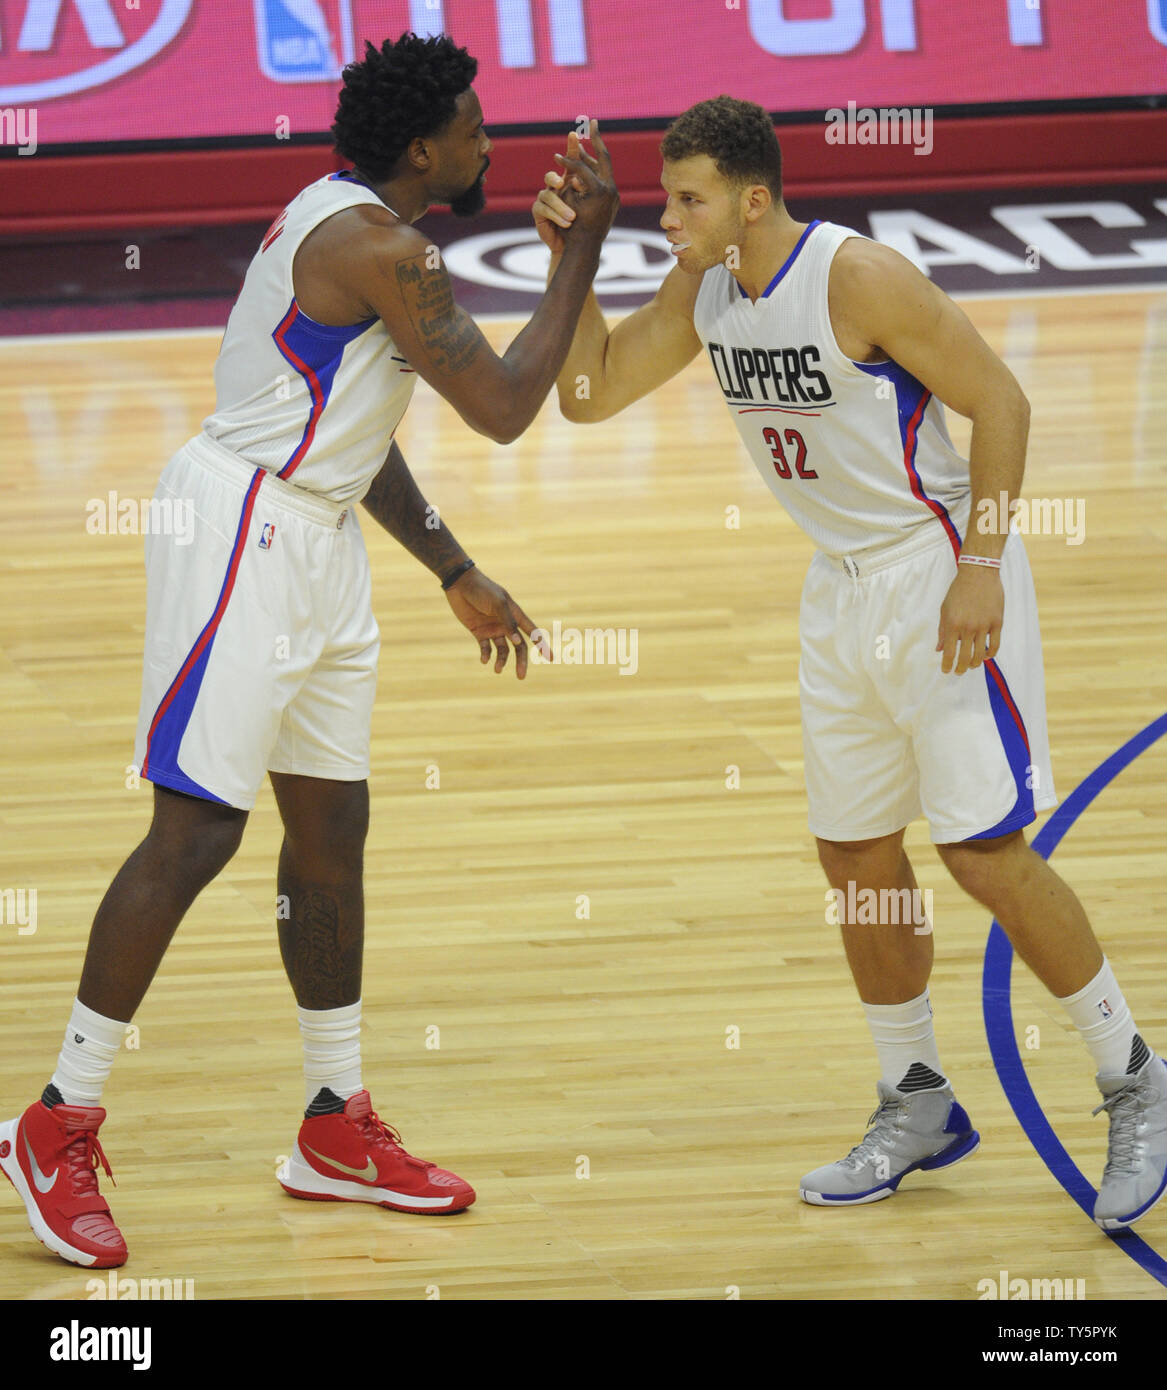 Los Angeles Clippers center DeAndre Jordan (6) hugs Blake Griffin (32) in  the second half of their NBA basketball game against the Los Angeles Lakers  in Los Angeles on December 21, 2011.